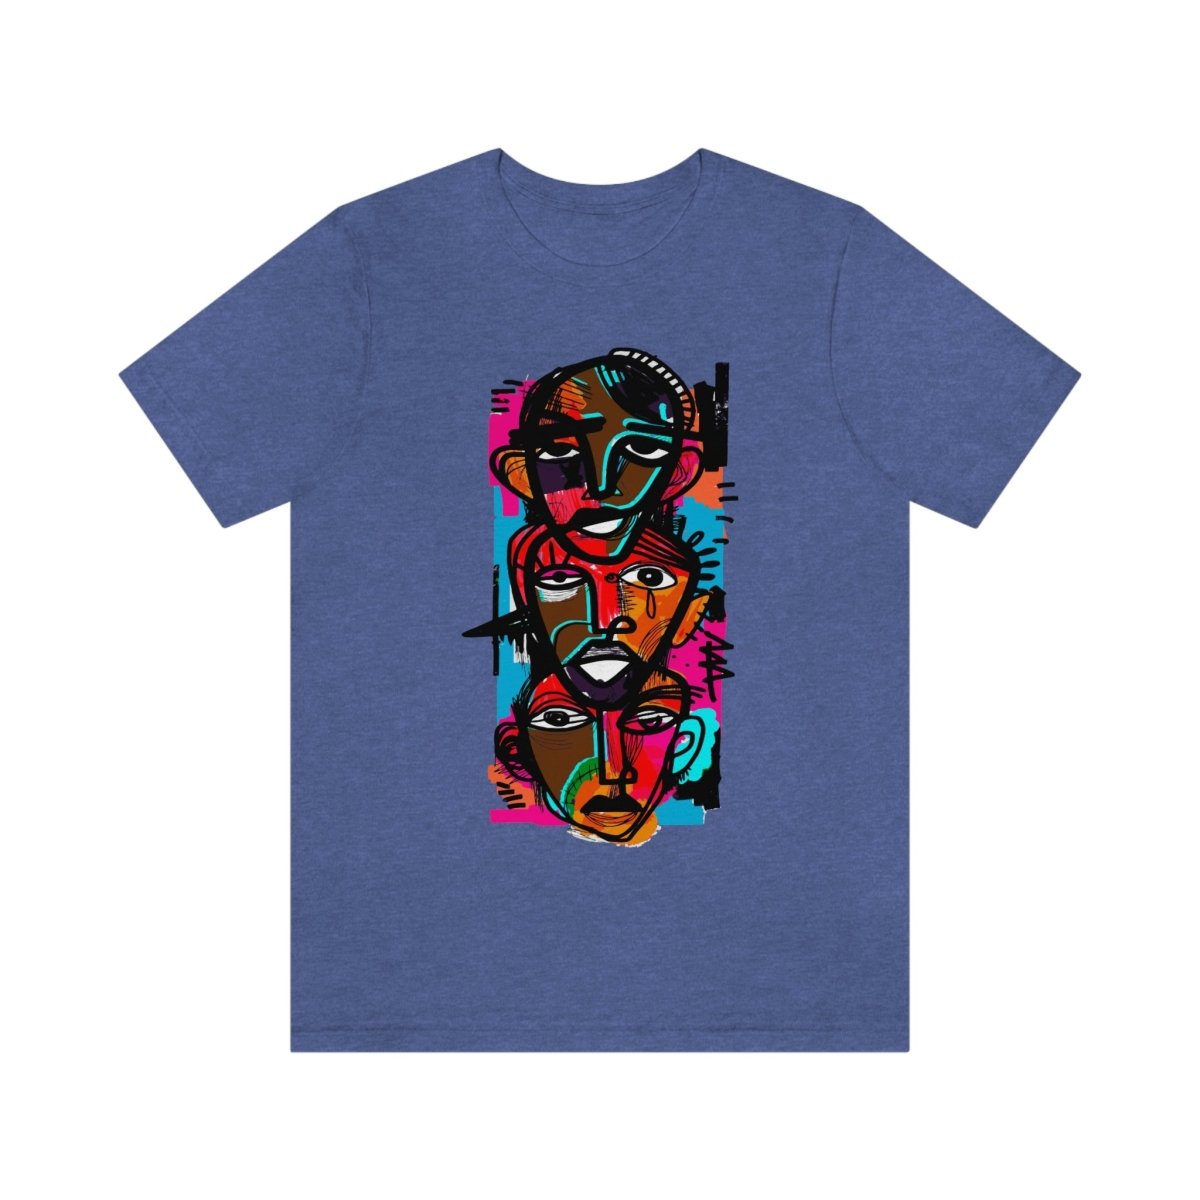 Abstract Men Shirt - The Trini Gee